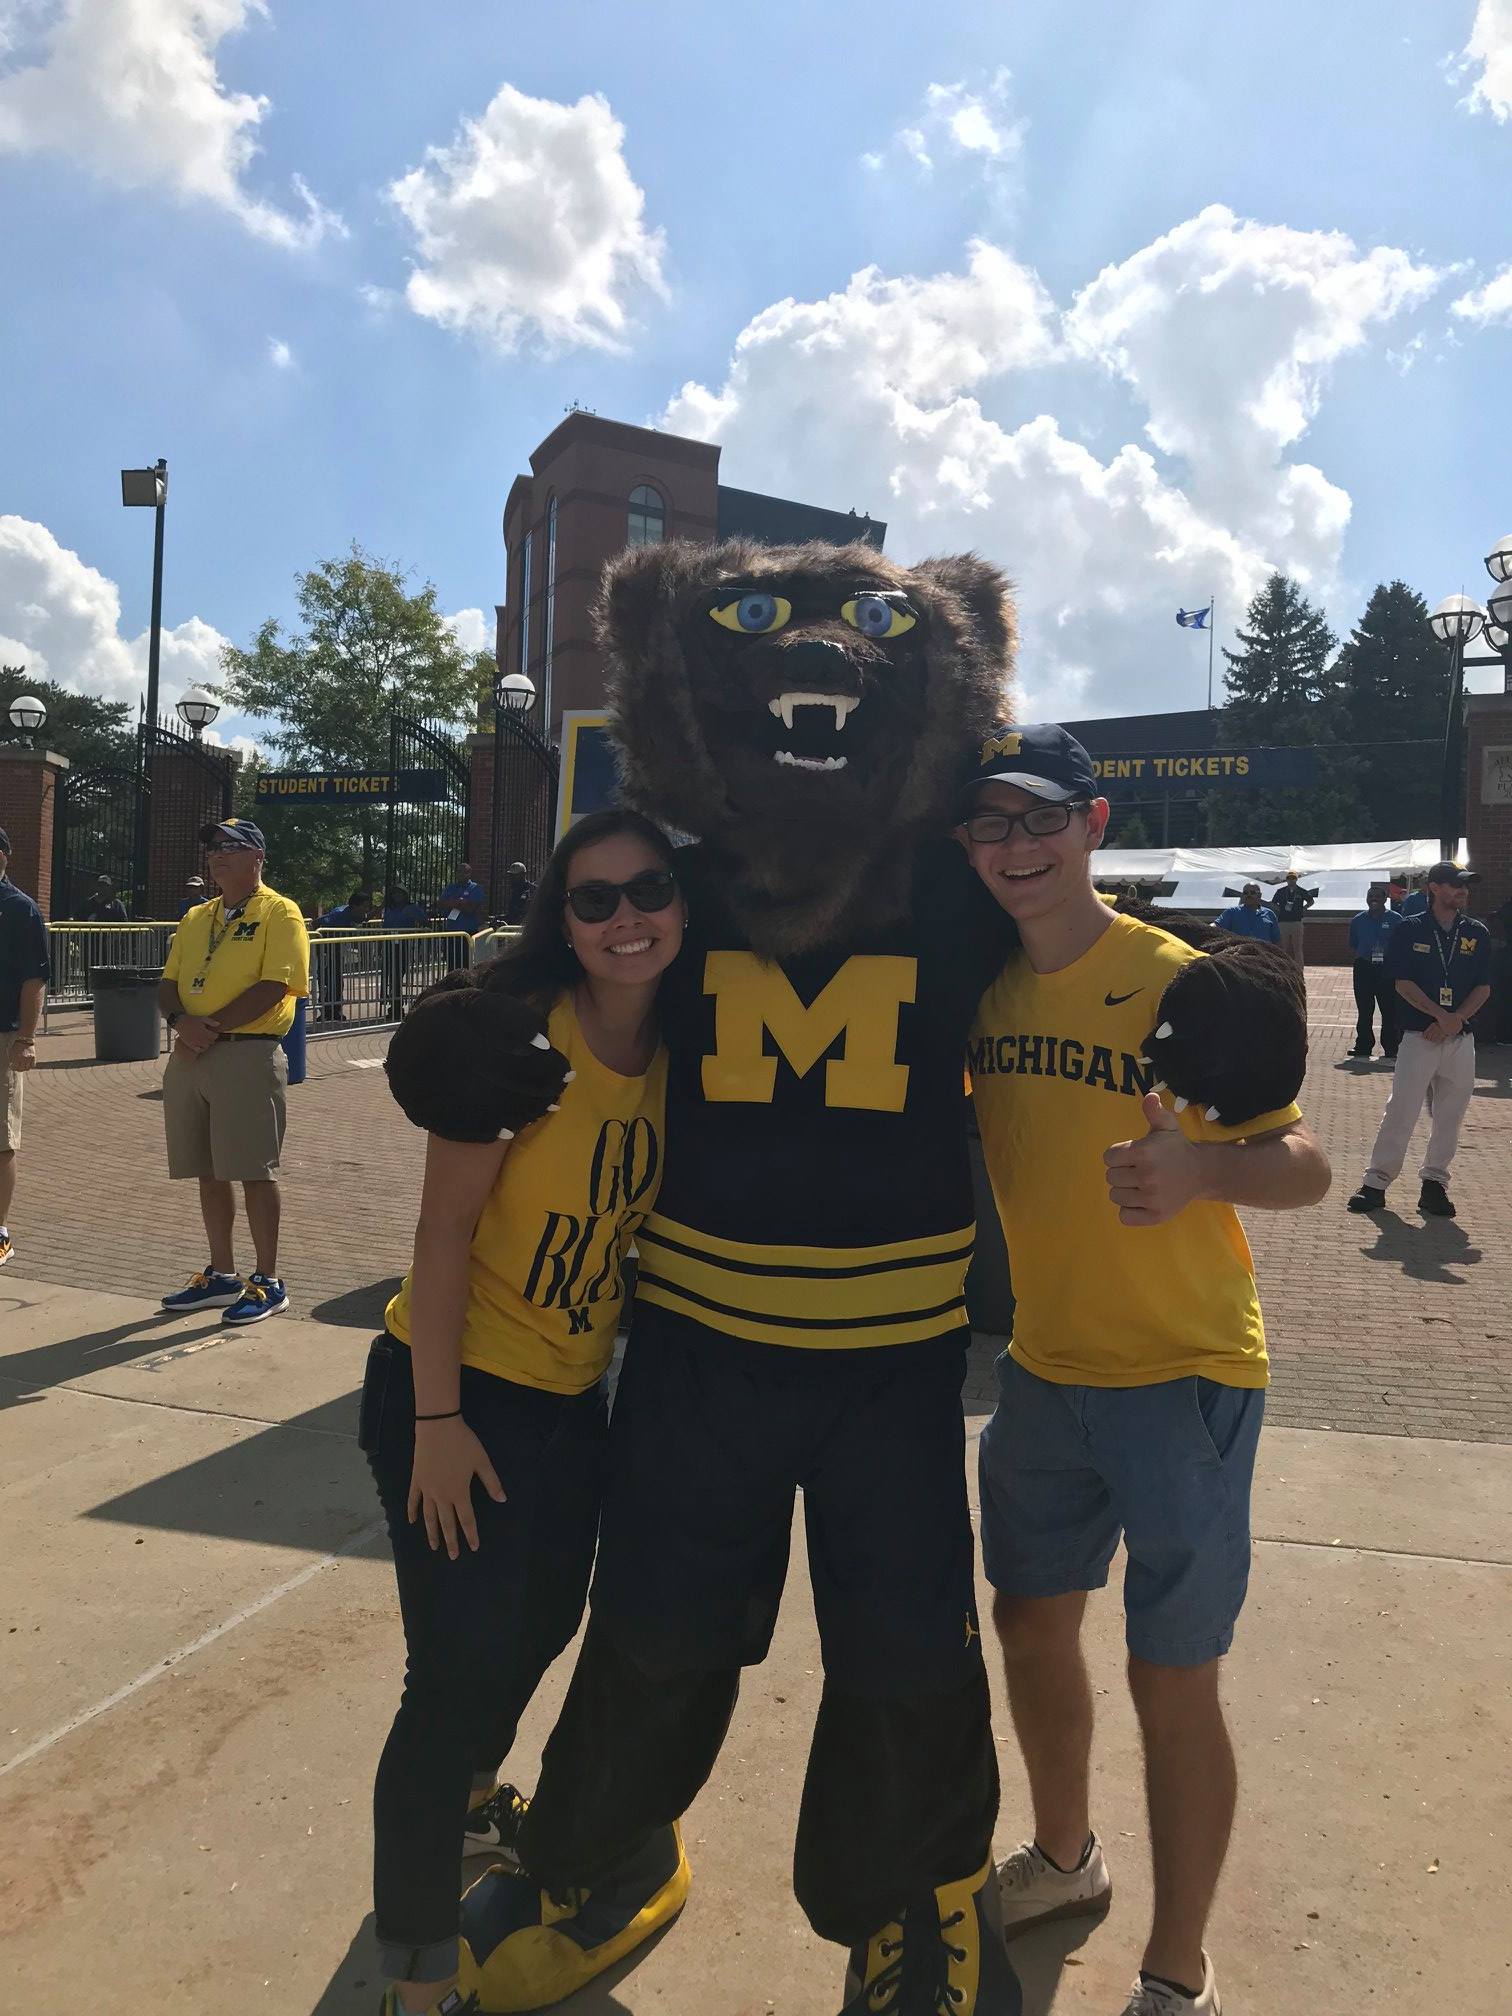 Ryan and friend with Wolverine mascot